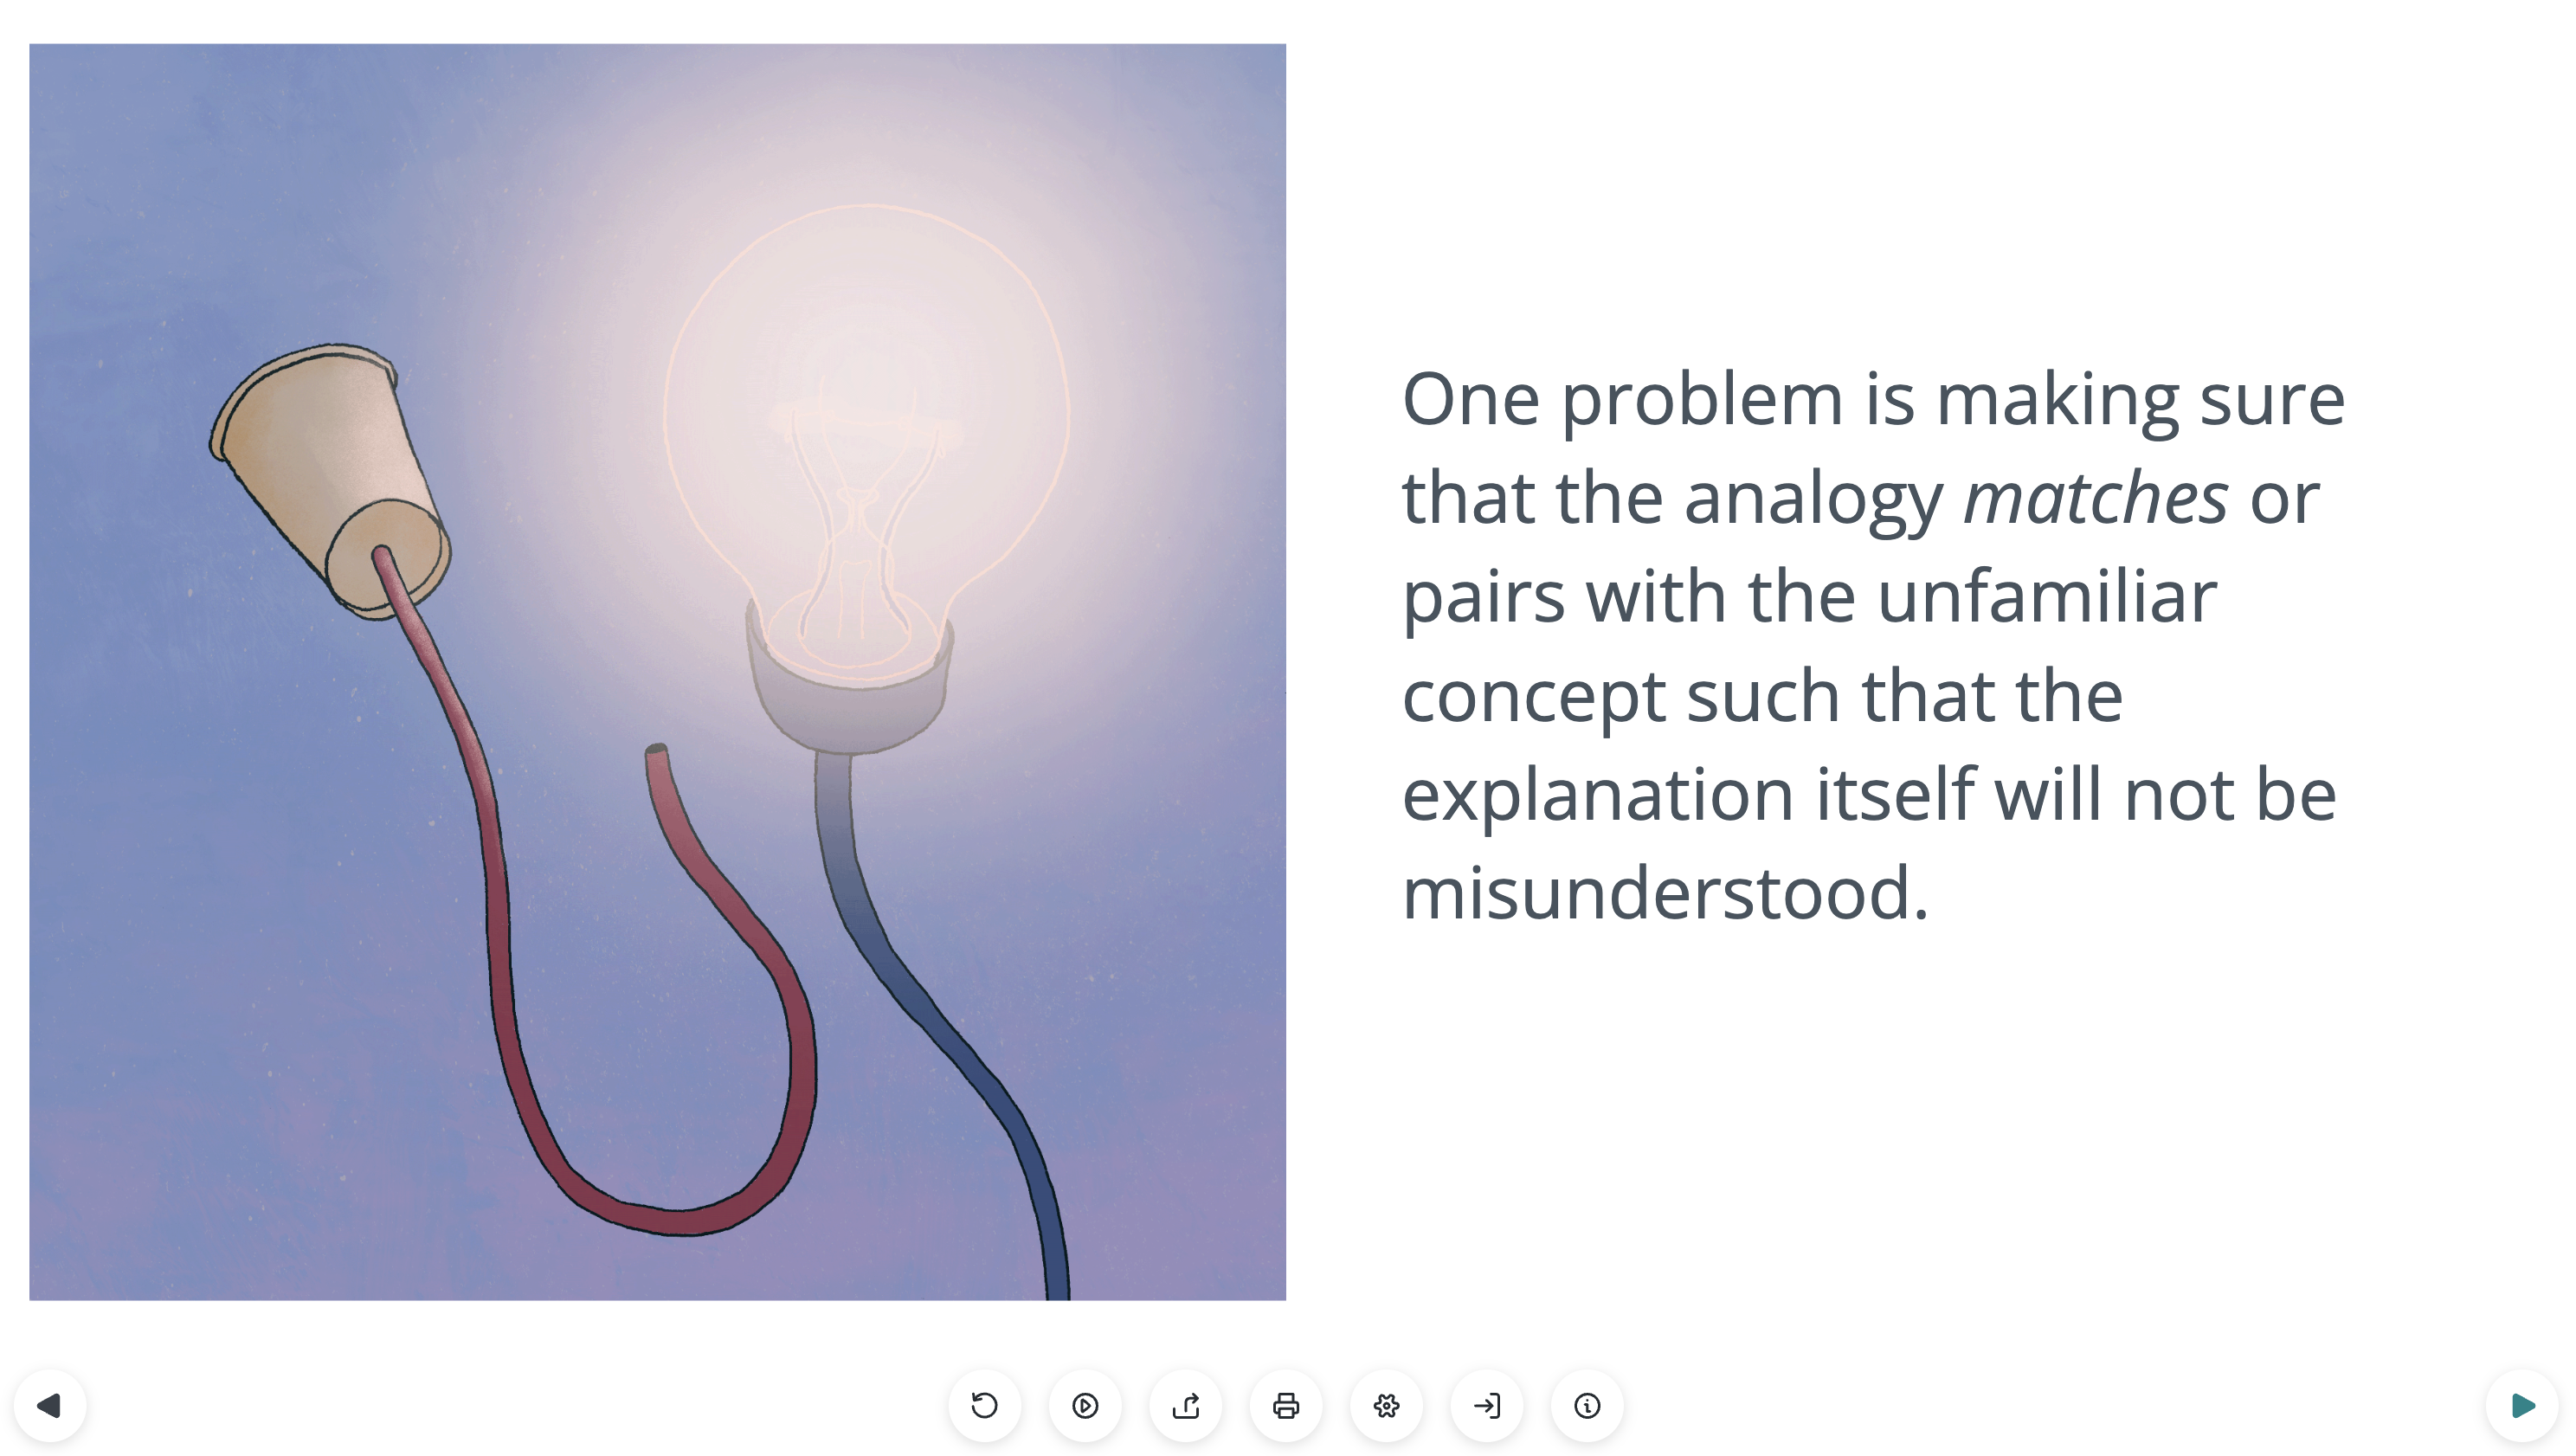 screenshot from course about analogies: "one problem is making sure that the analogy matches or pairs with the unfamiliar concept such that the explanation itself will not be misunderstood."